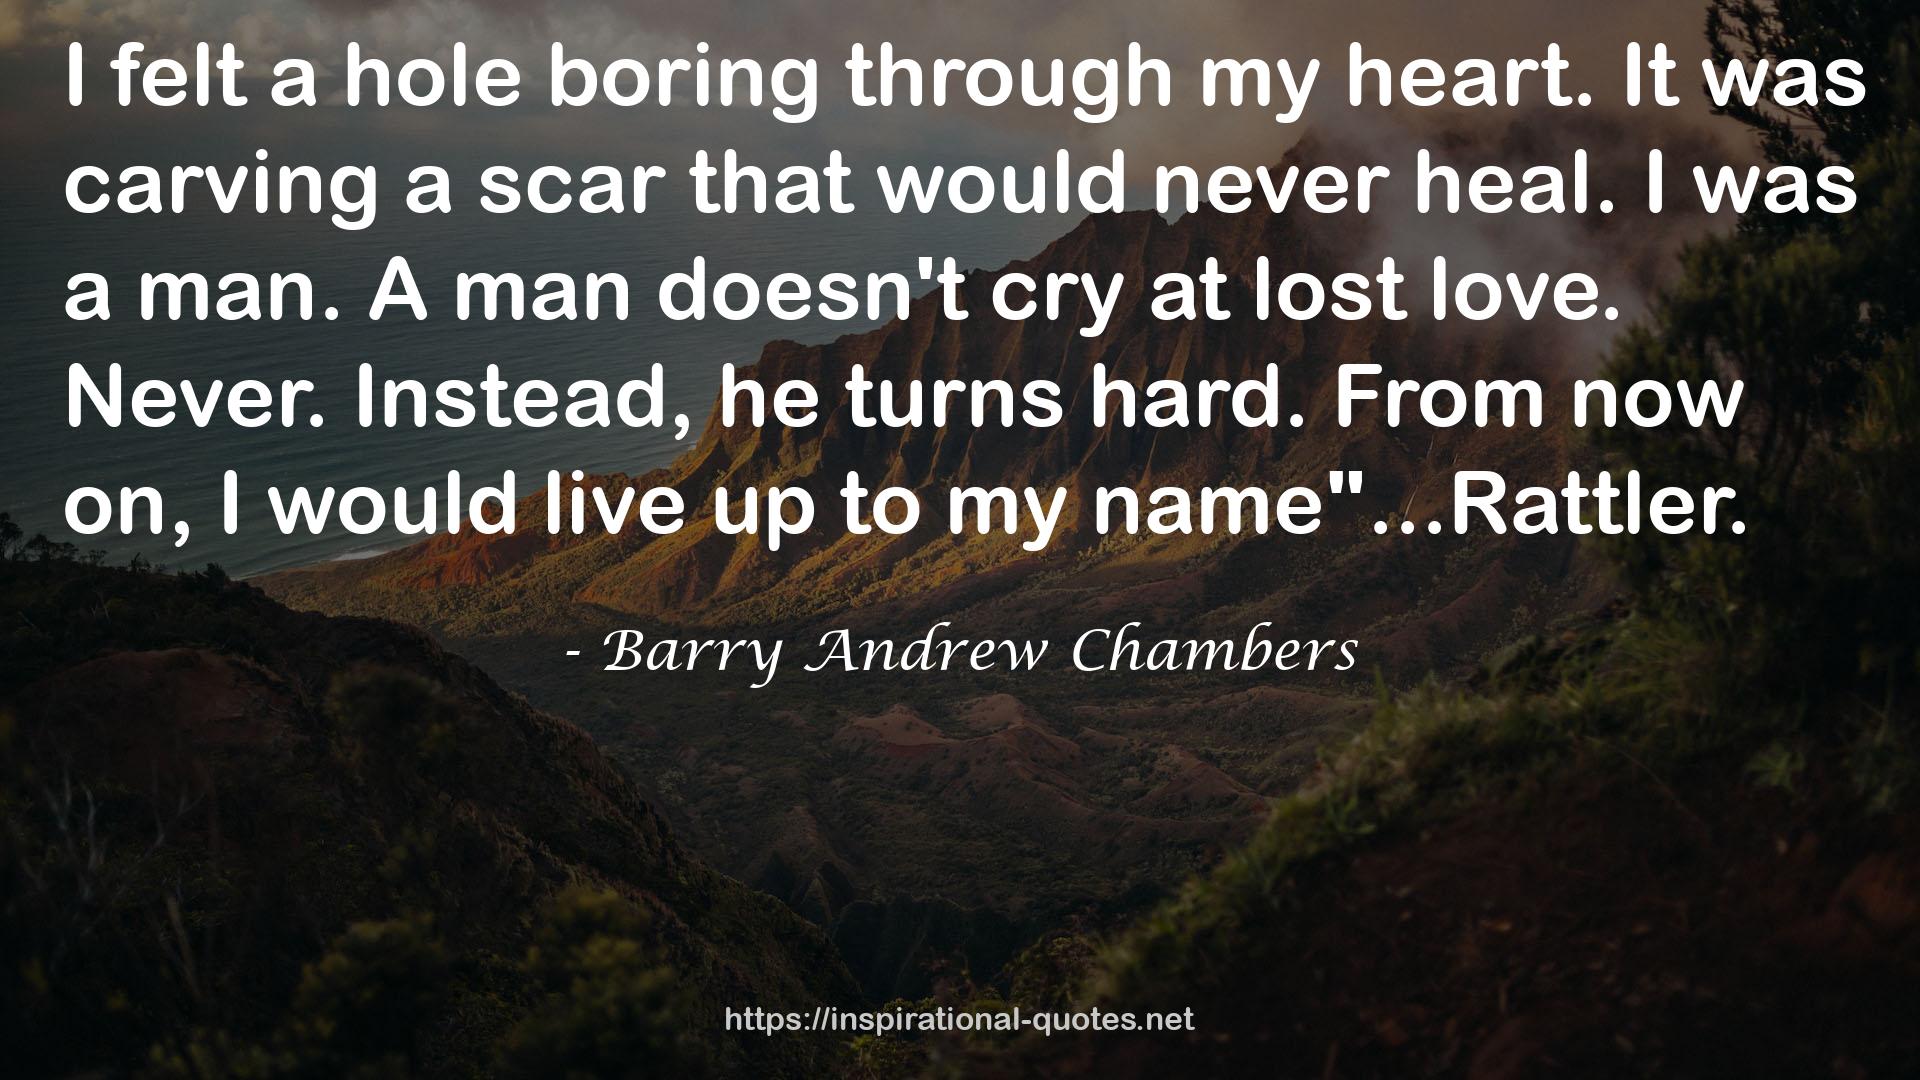 Barry Andrew Chambers QUOTES